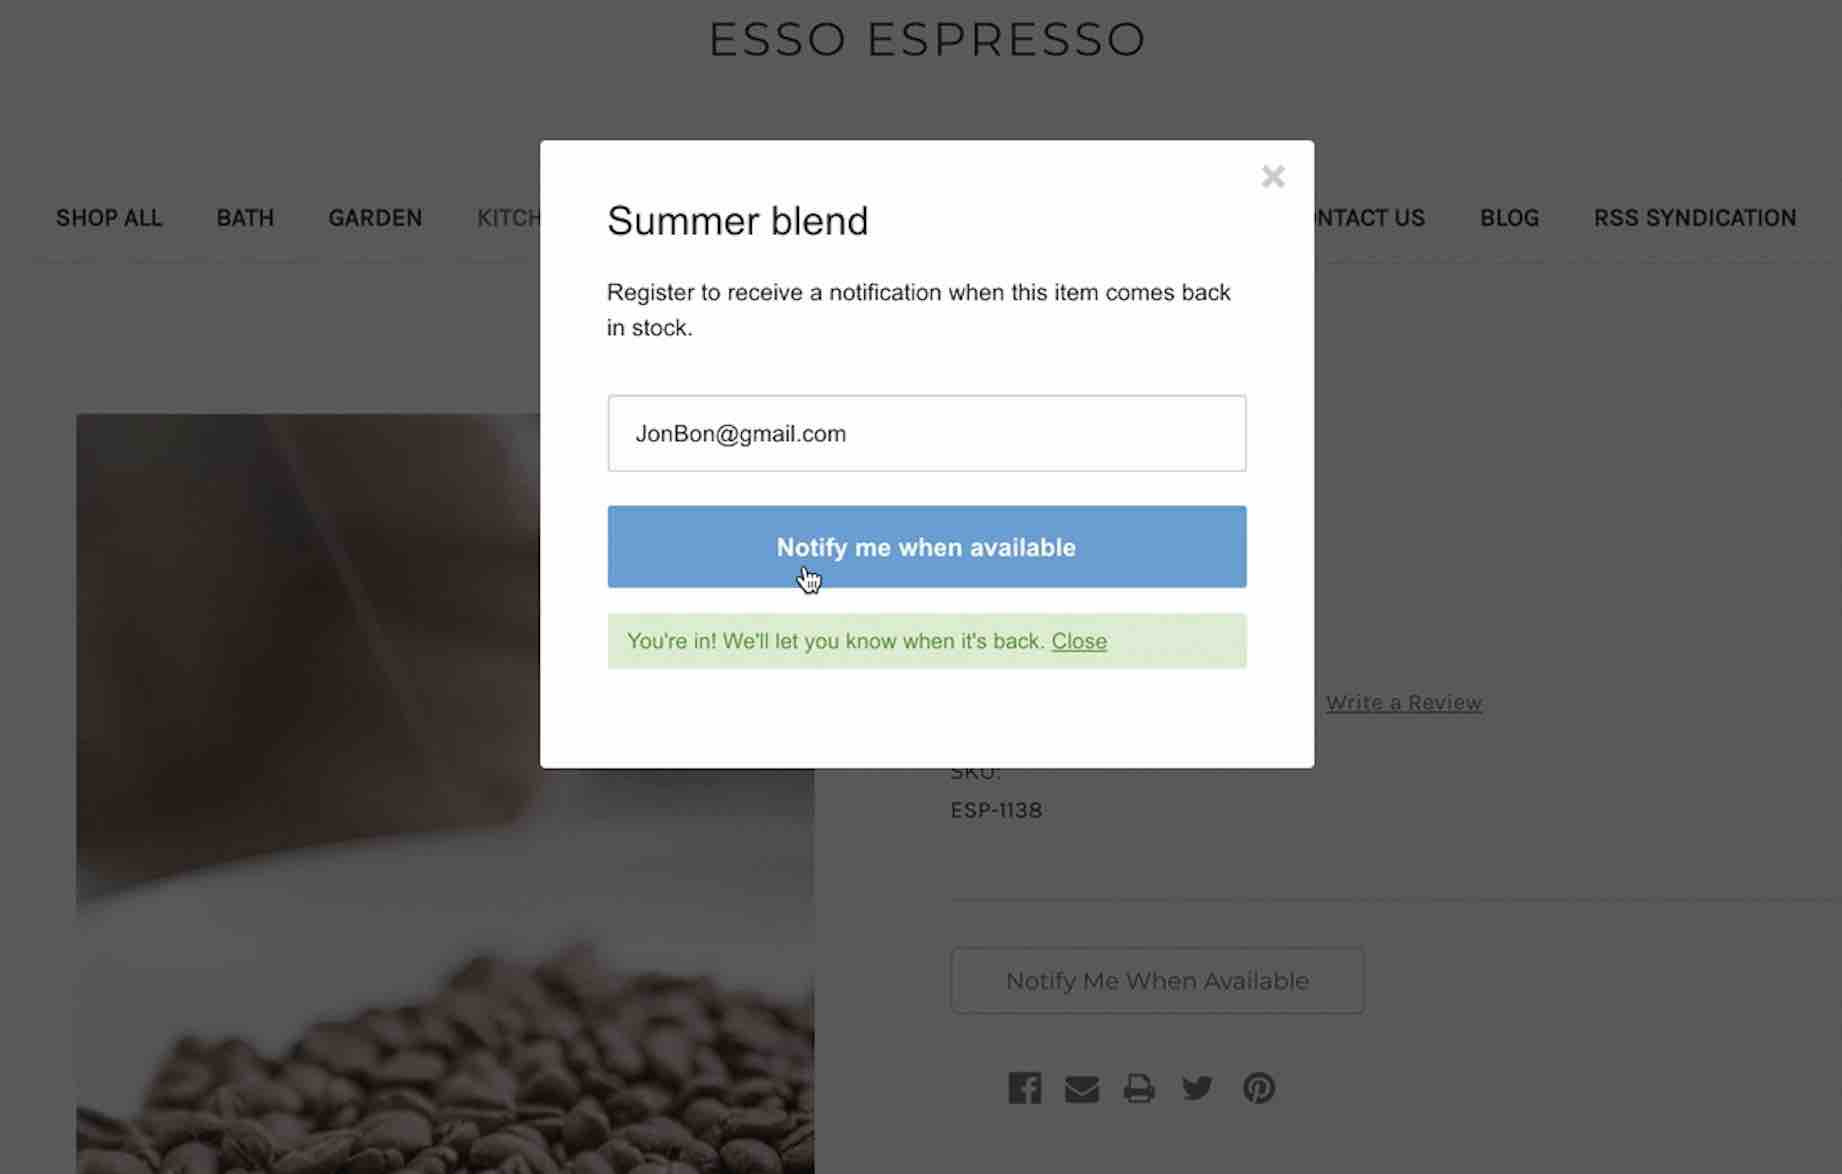 Back in stock popup form on Esso Espresso store with Notify me when available with blue background, and success message highlighted in green